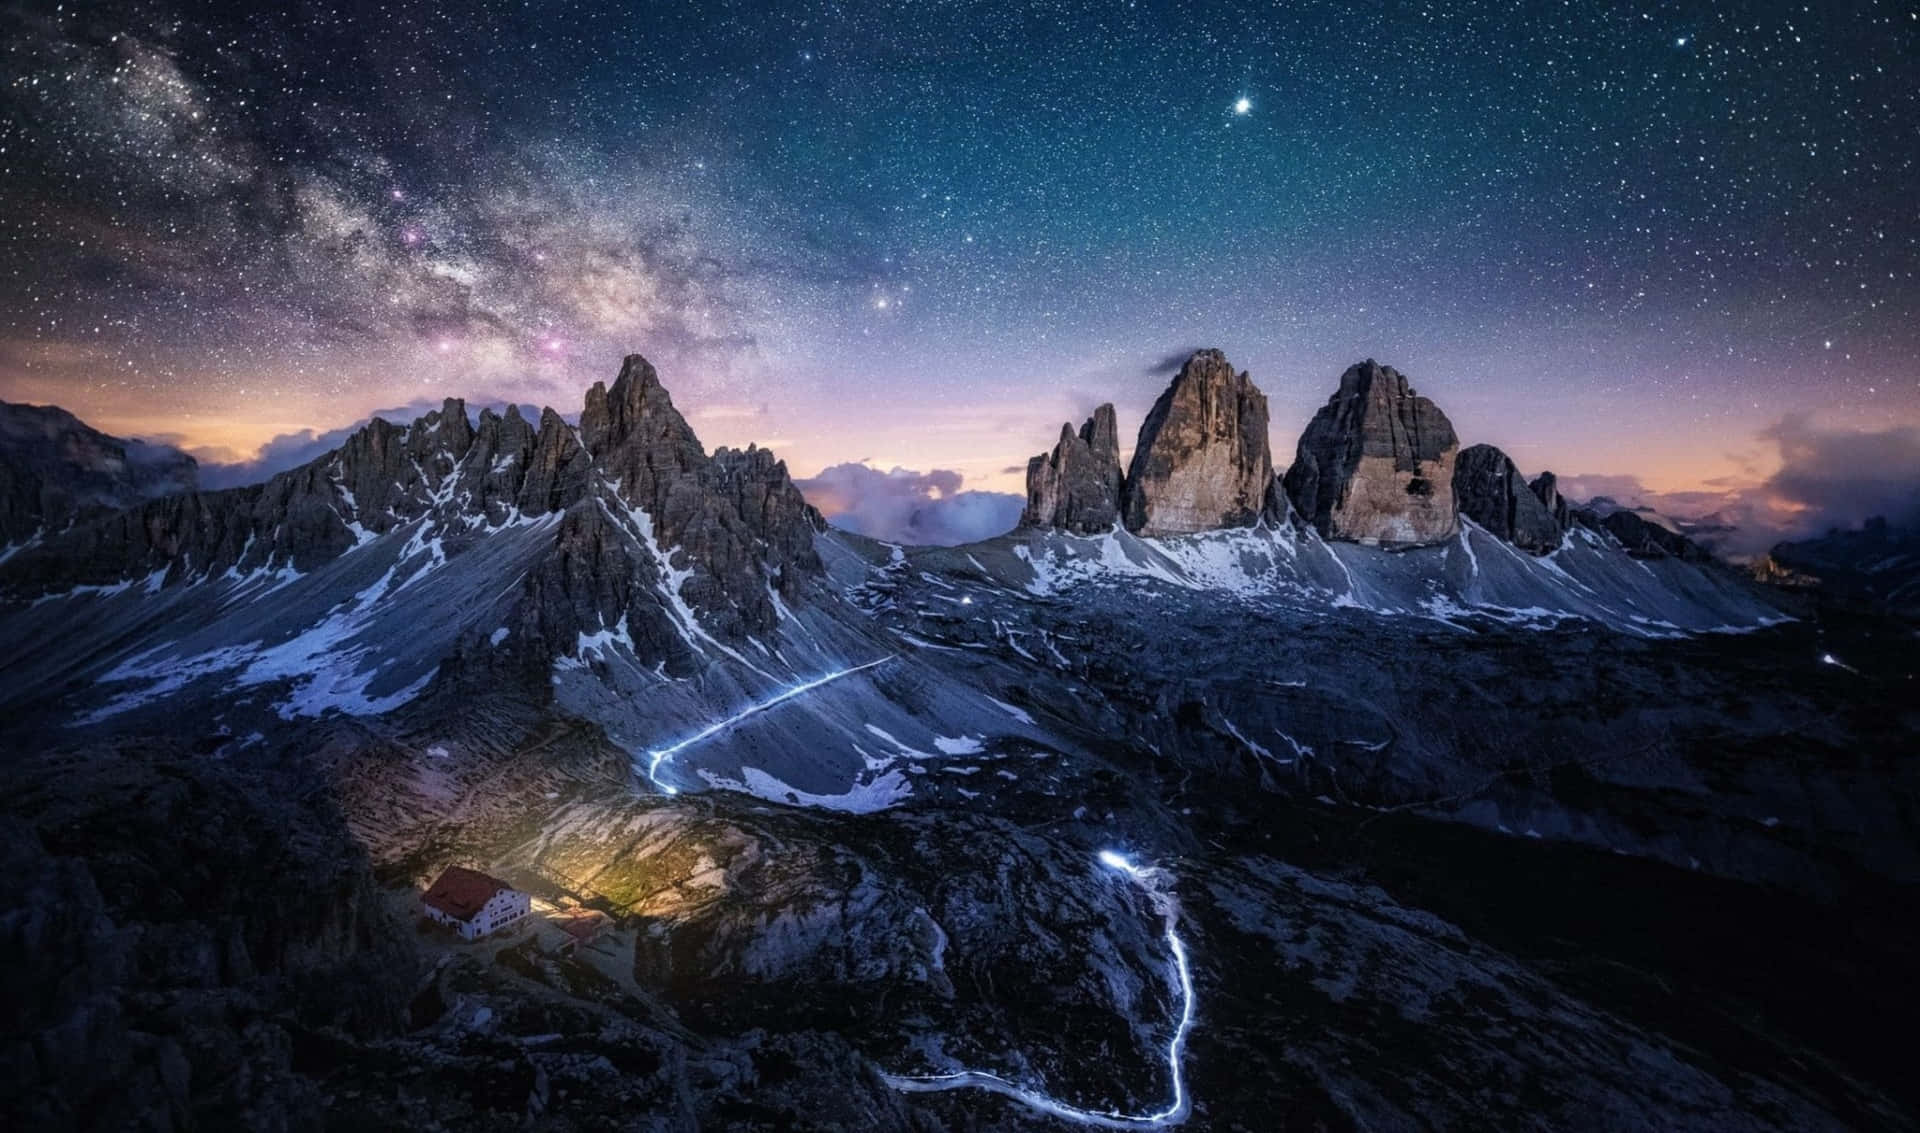 a mountain with a cabin under the stars